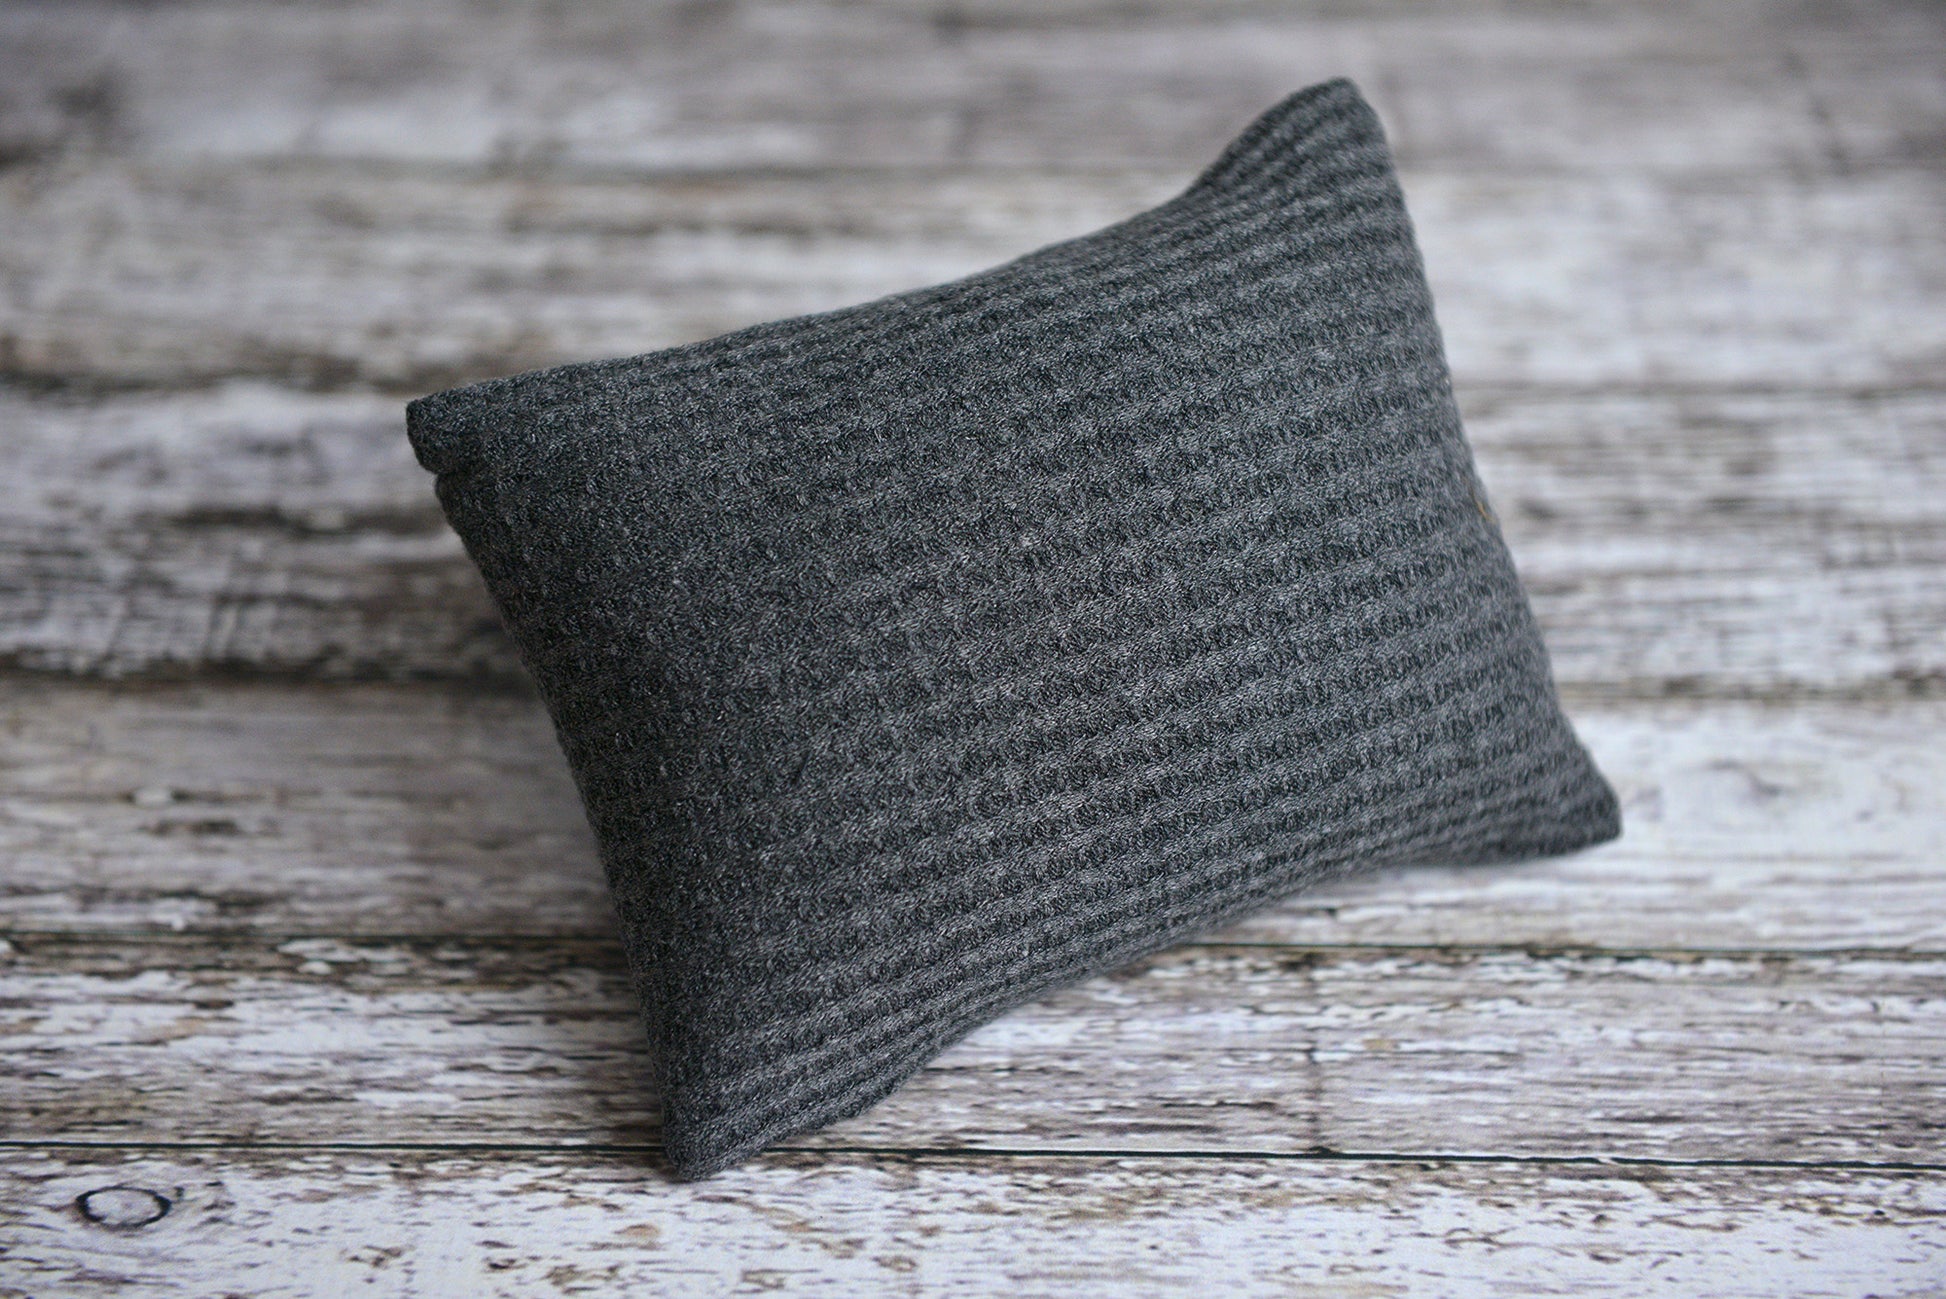 Mini Pillow with Cover - Perforated - Twotone Charcoal-Newborn Photography Props